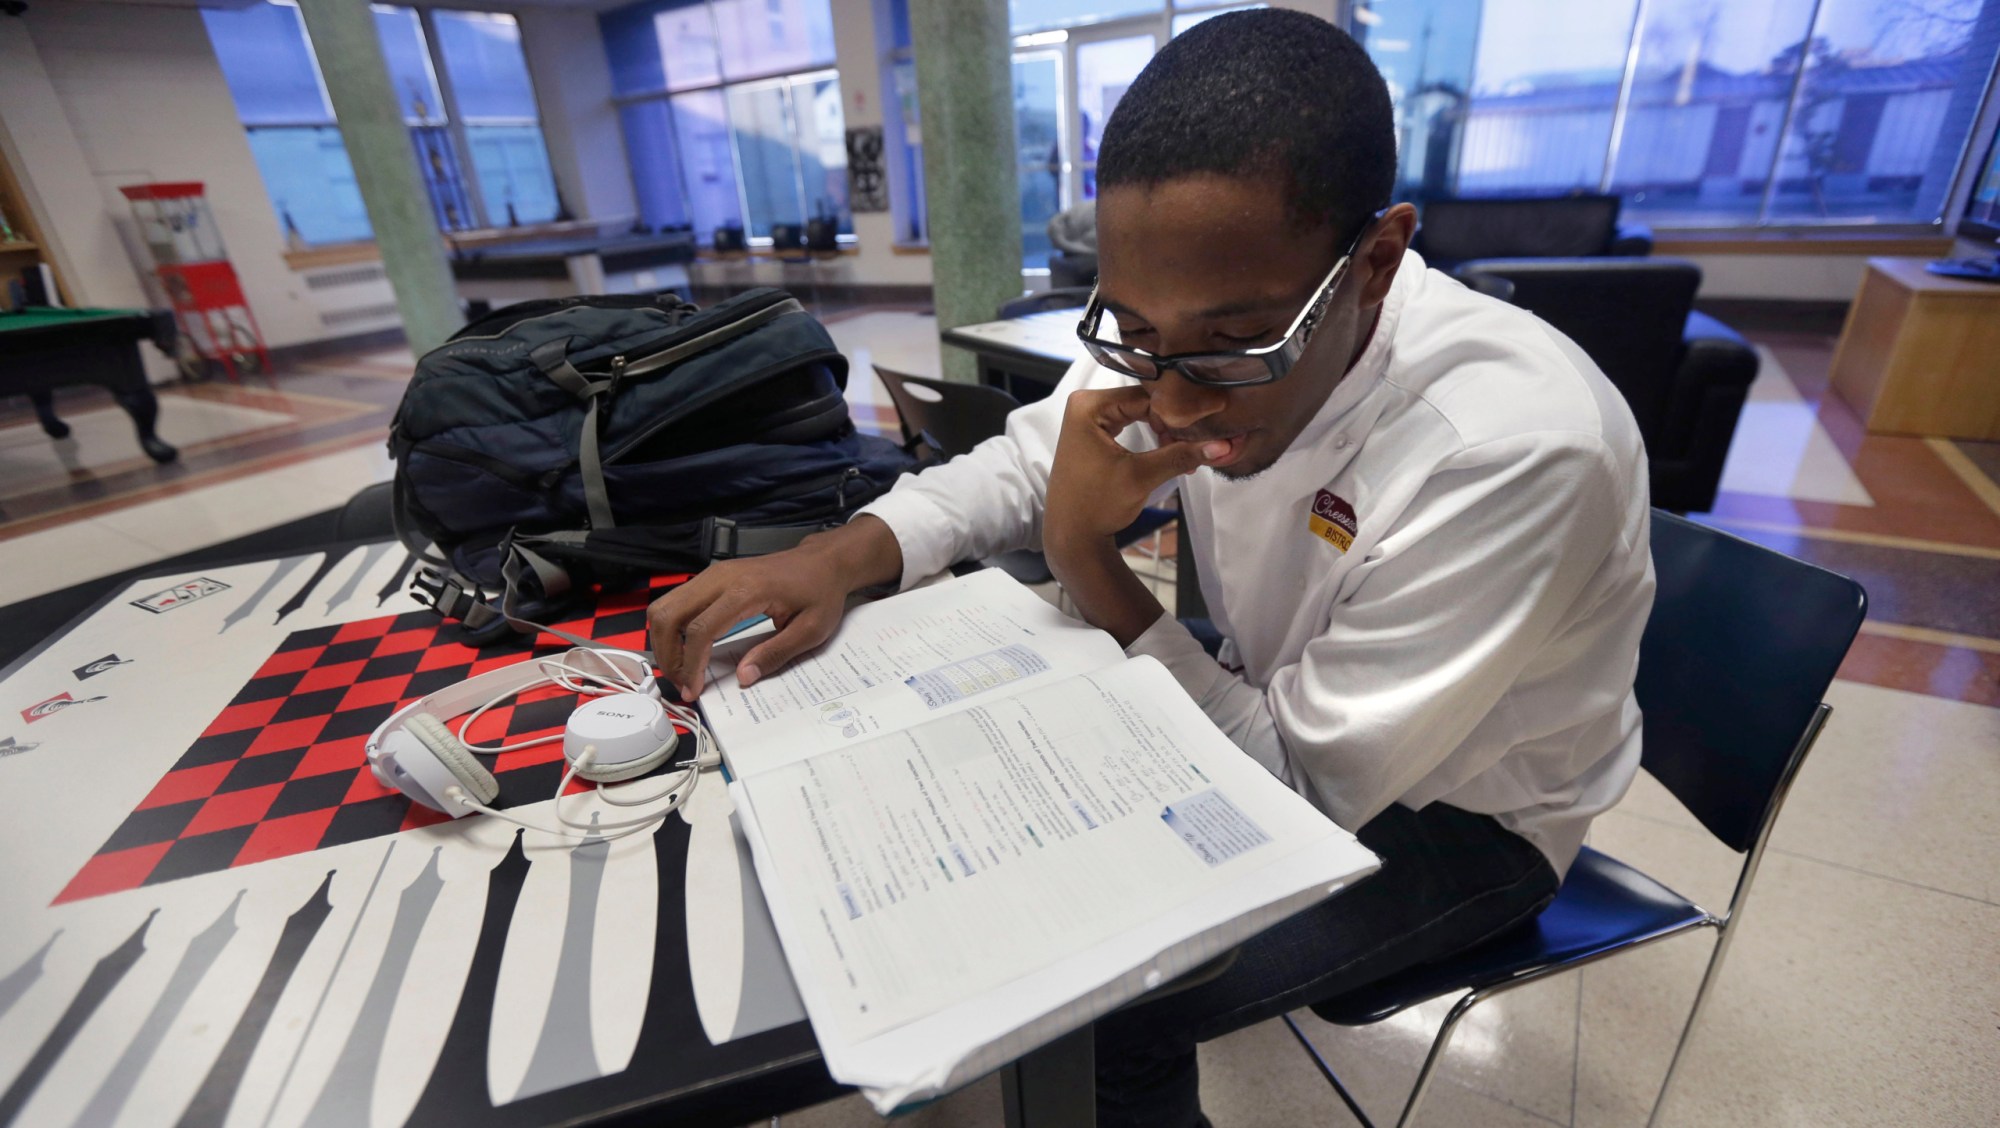 Xavier University student Triton Brown studies in a common area on campus before going to one of his part-time jobs in New Orleans. (AP/Gerald Herbert)